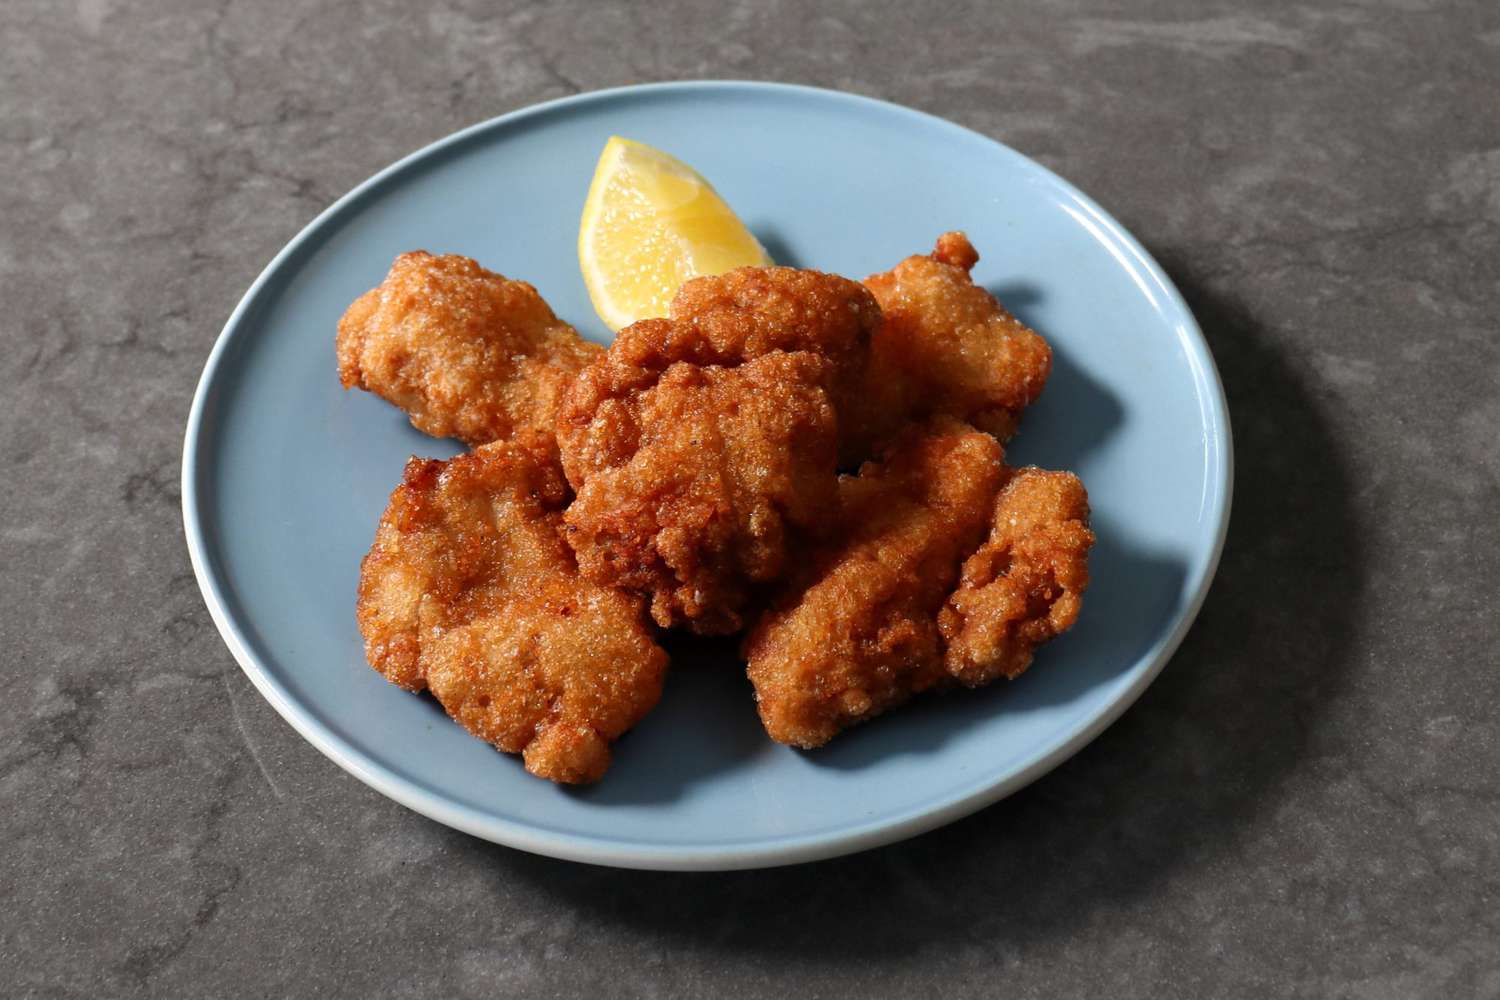 fried chicken pieces with a lemon wedge on a blue plate